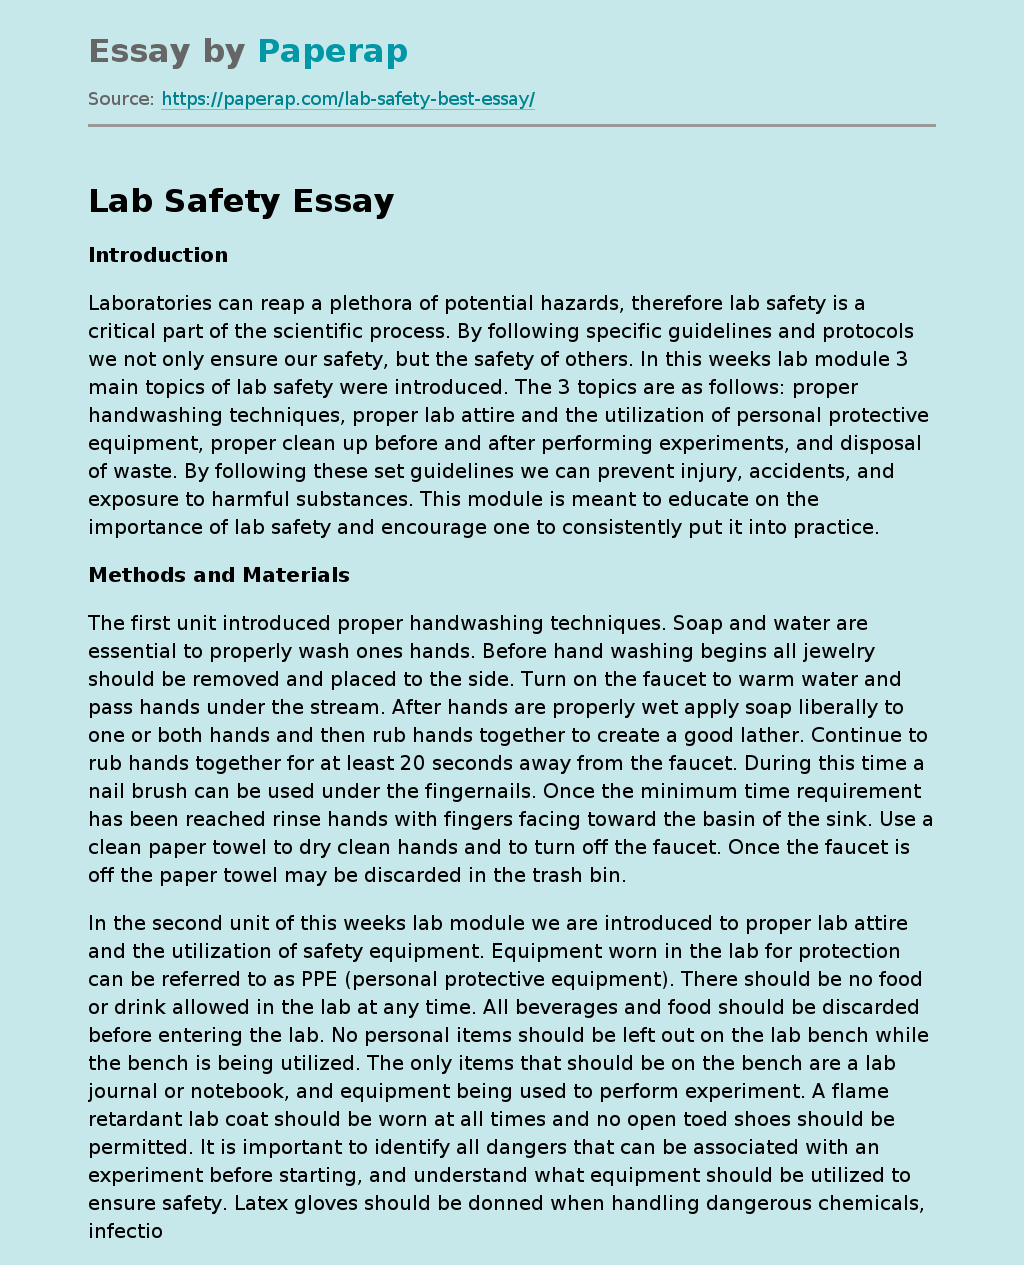 Importance of Lab Safety